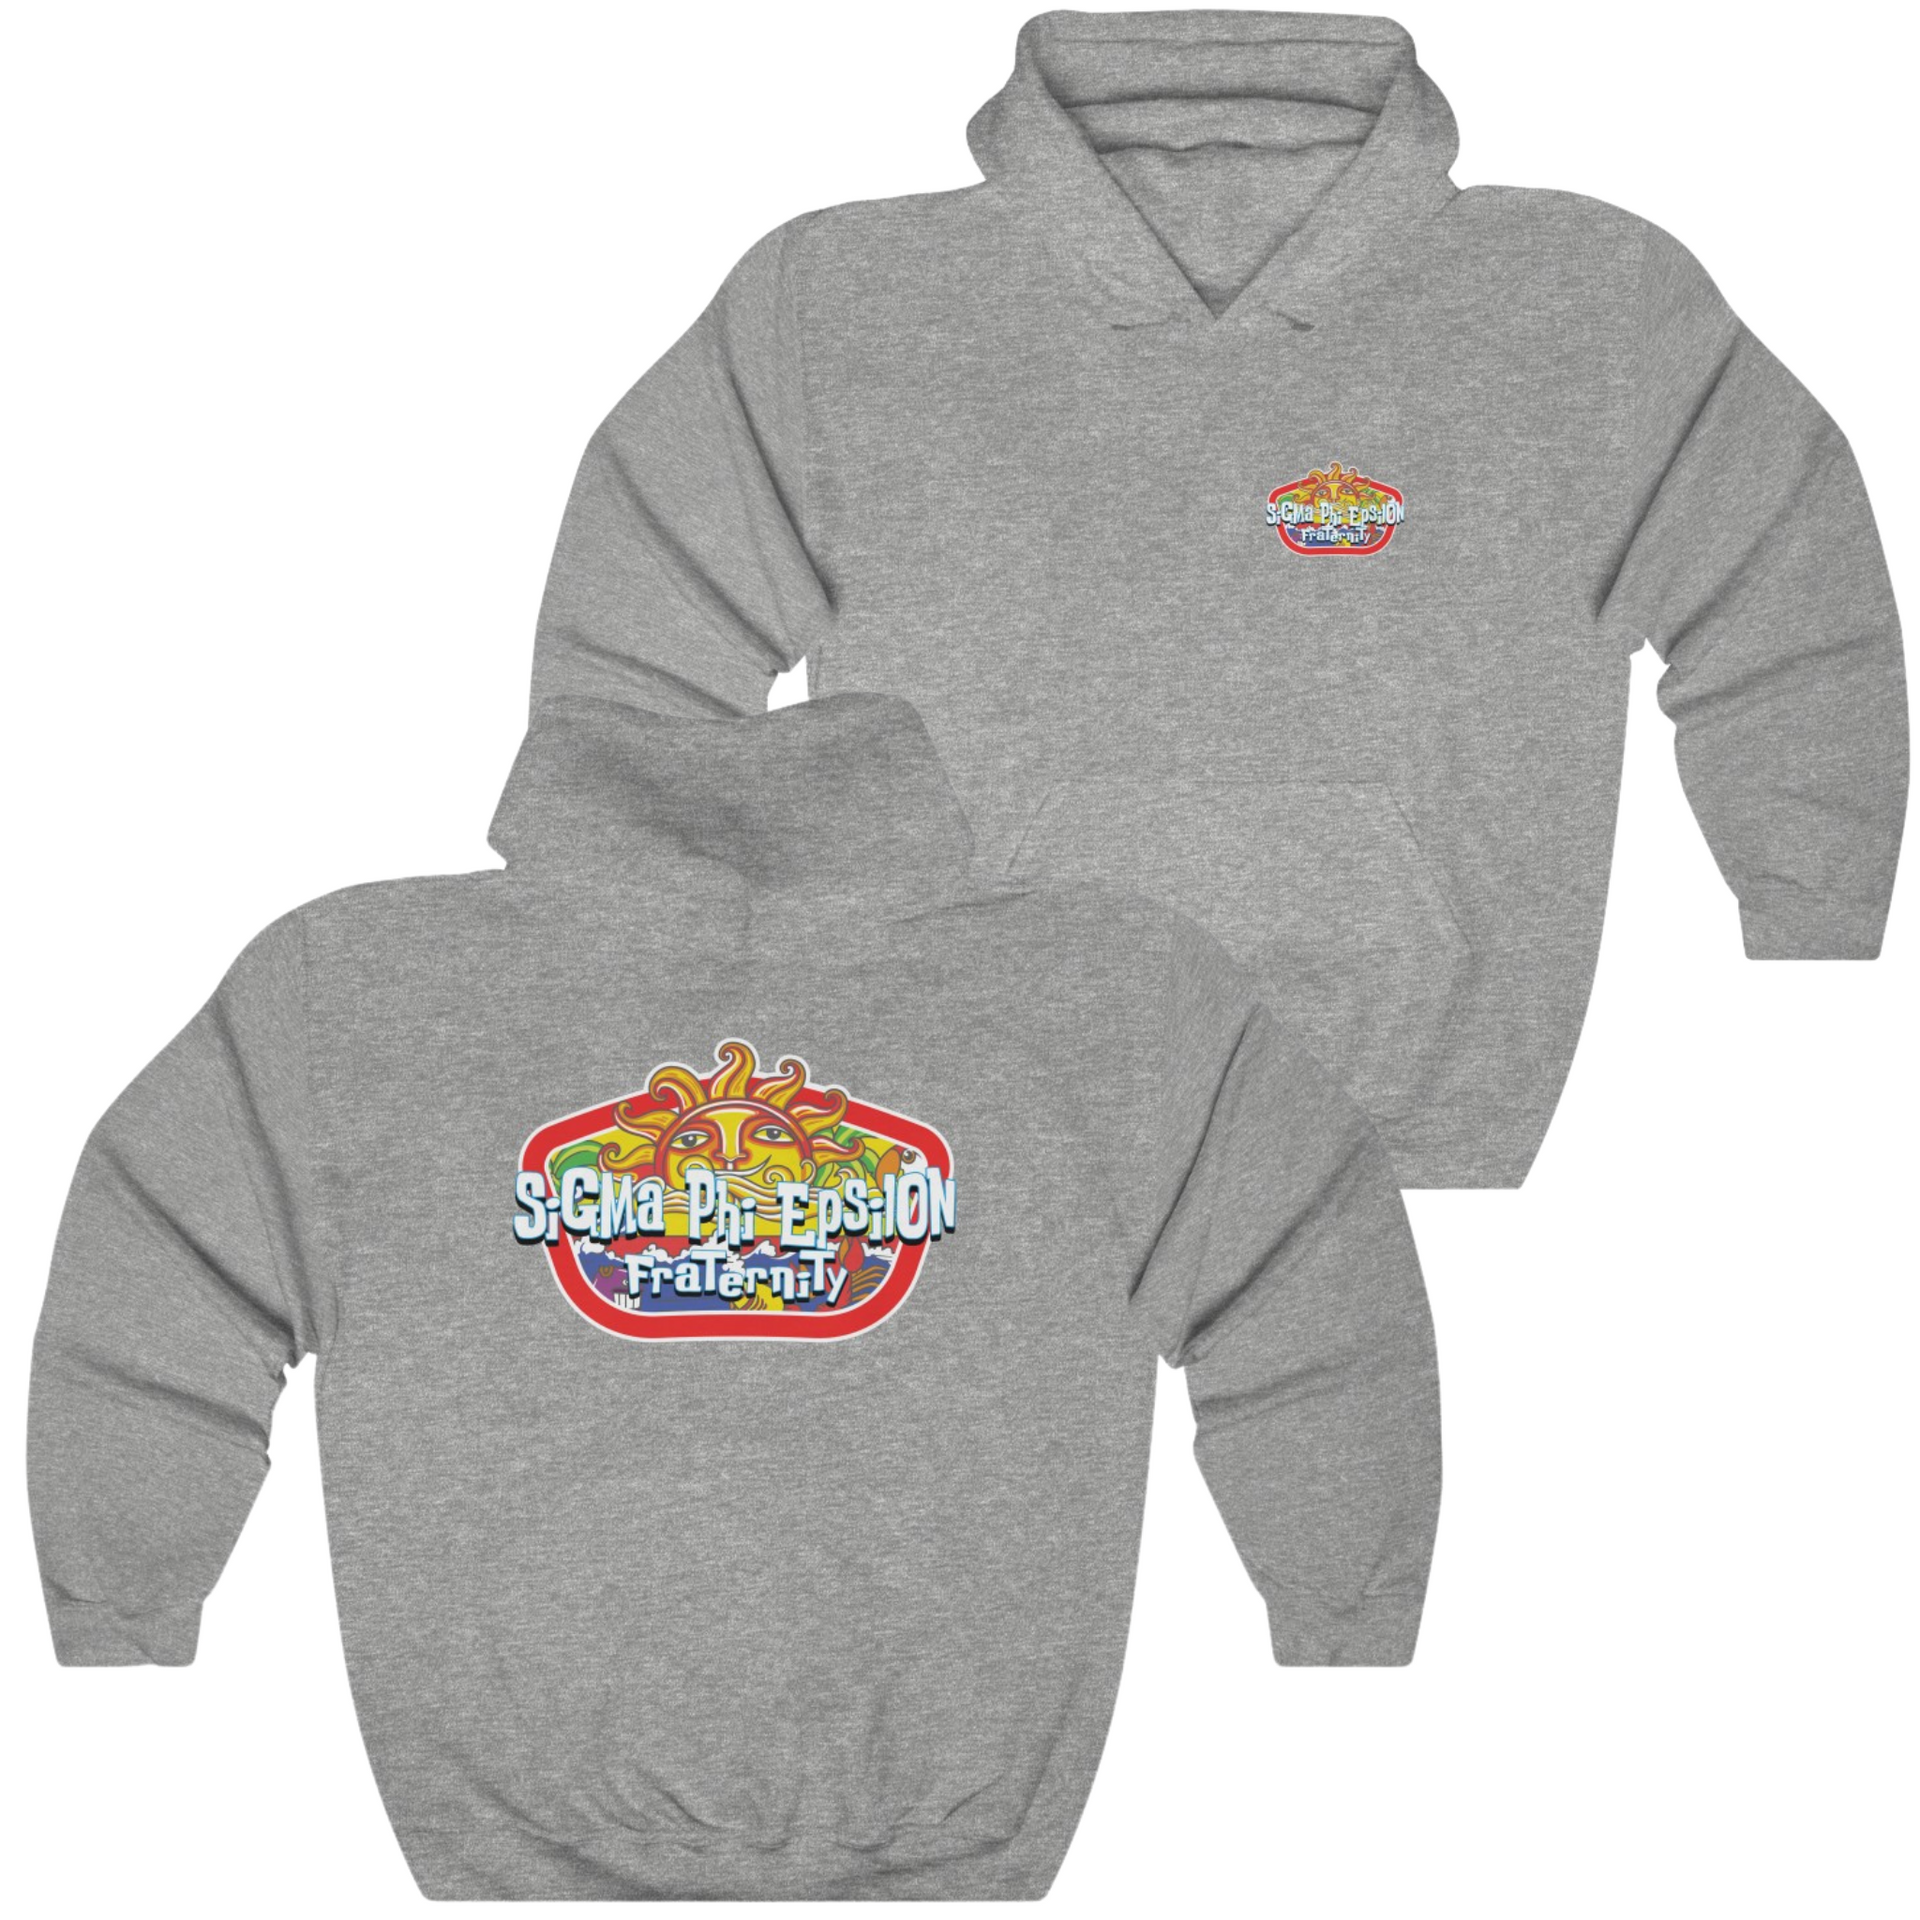 Grey Sigma Phi Epsilon Graphic Hoodie | Summer Sol | SigEp Fraternity Clothes and Merchandise